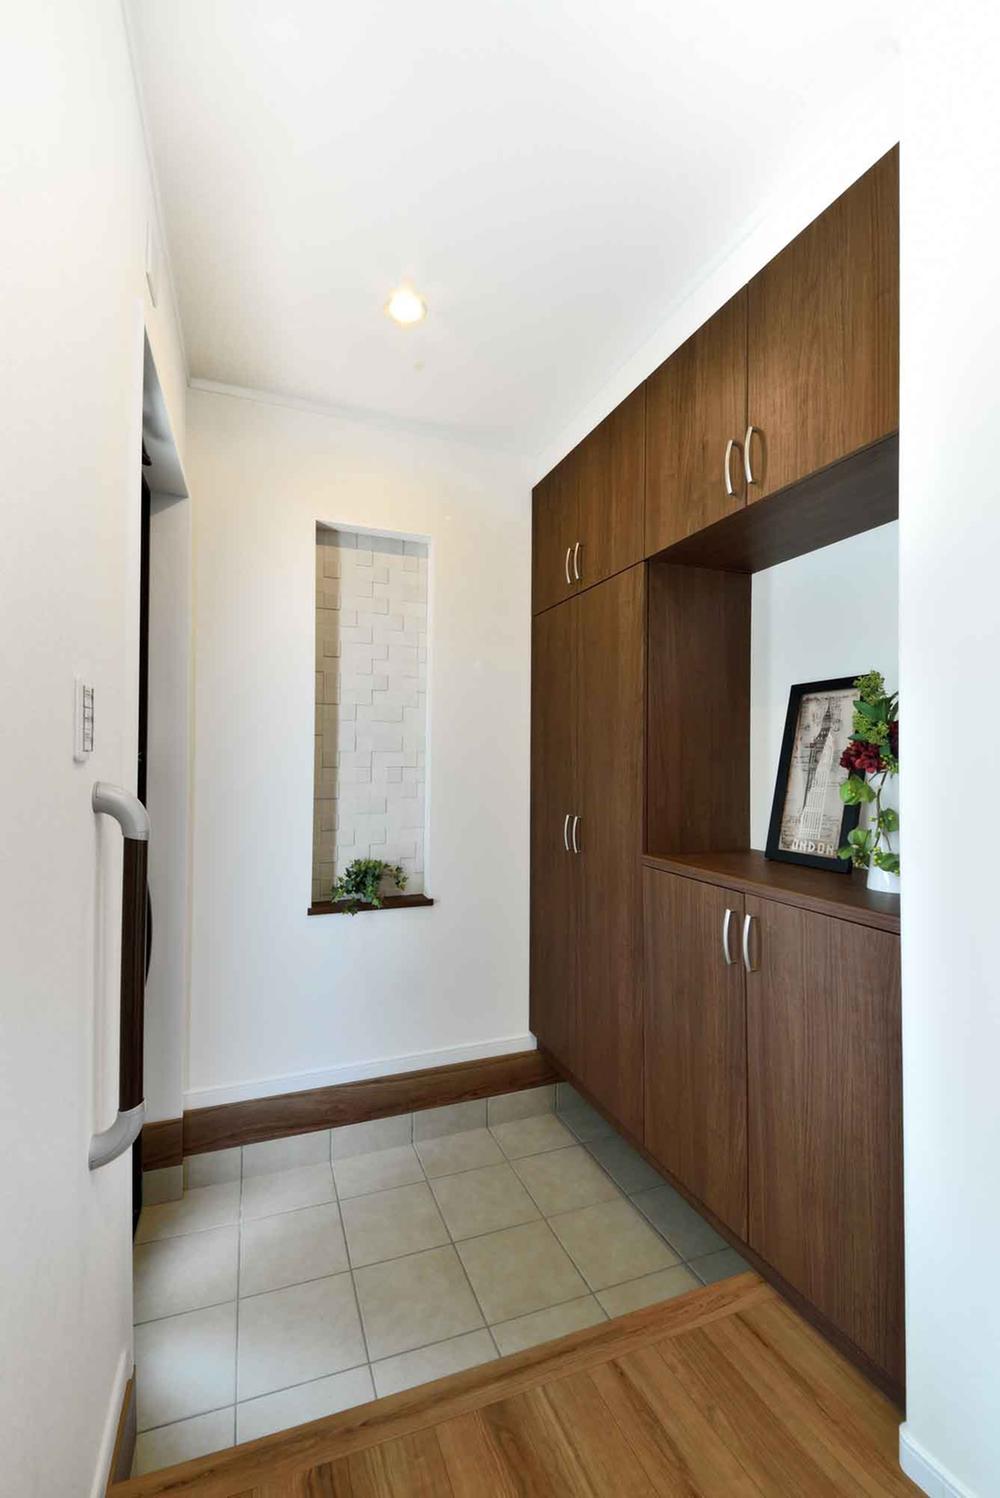 Model house photo. C No. land entrance photo. Large front door storage that boots can also be easily accommodated. It was fashionable to provide a niche in the transverse. Please welcomed decorate seasonal flowers because it is the first place to welcome the customers. 